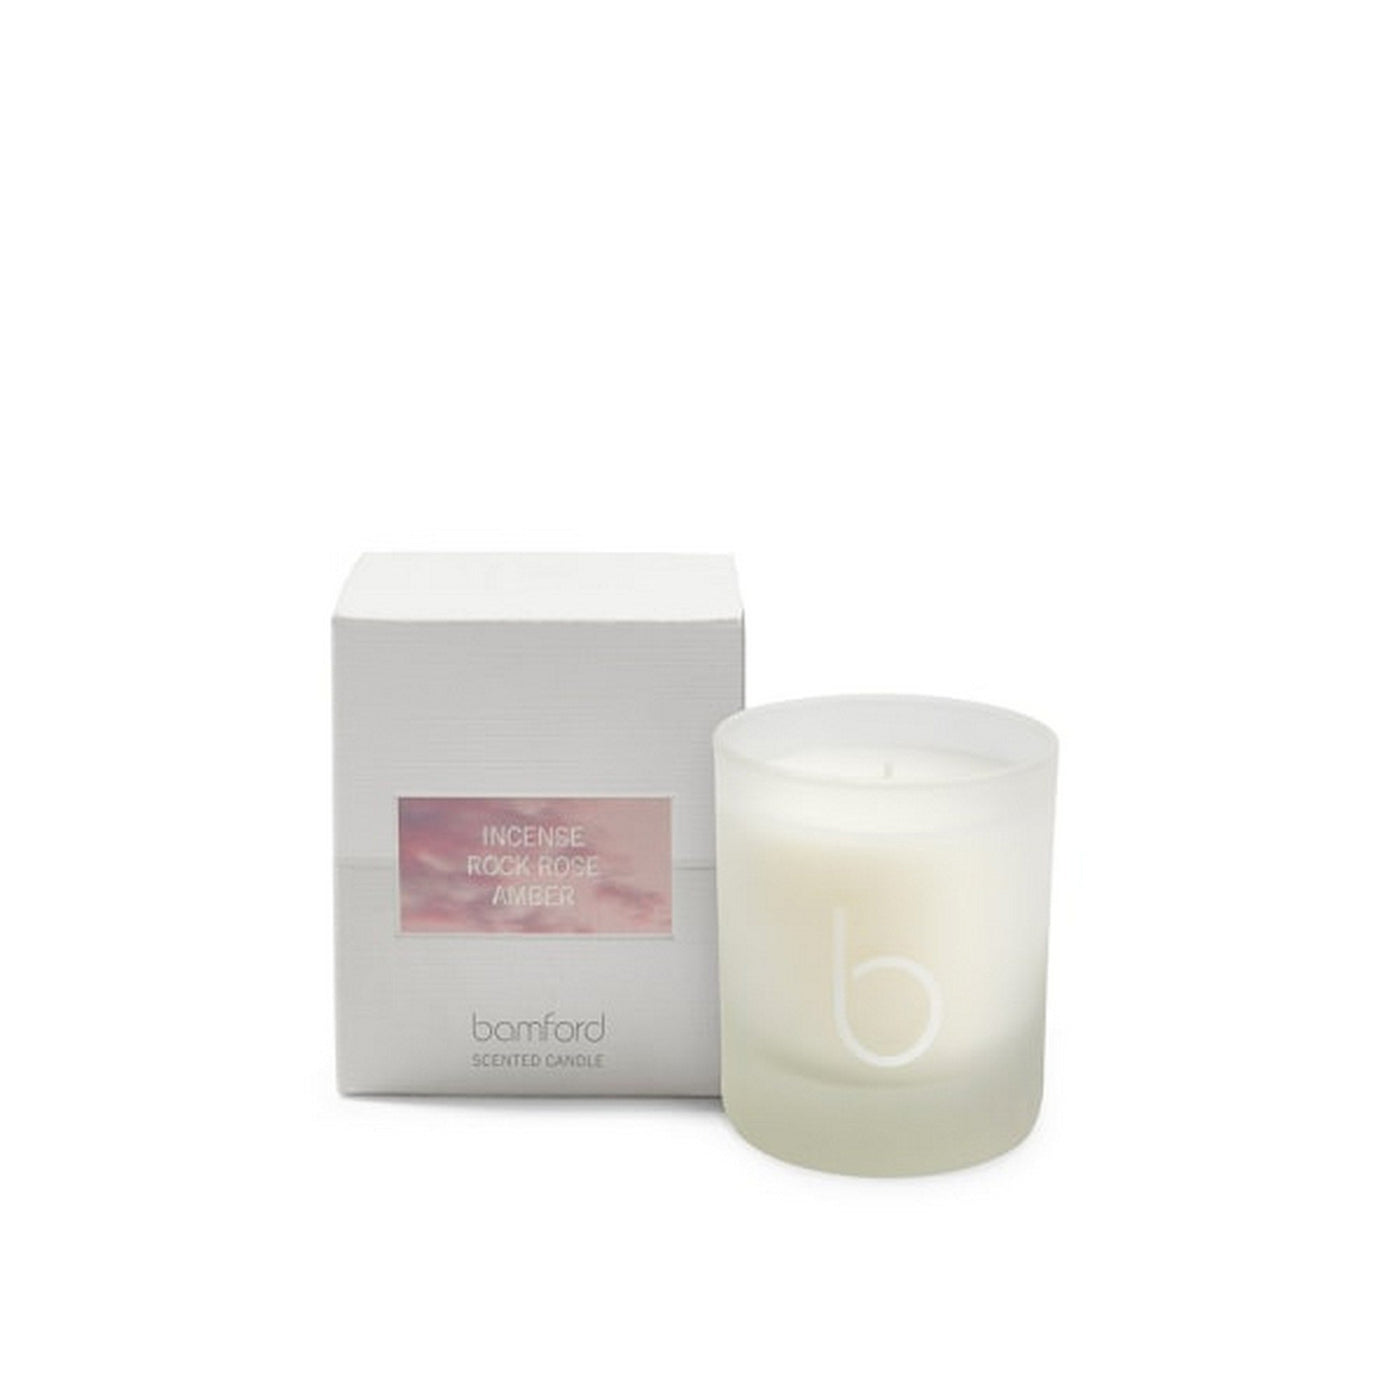 Bamford Incense - Rock Rose - Amber Scented Candle 140g